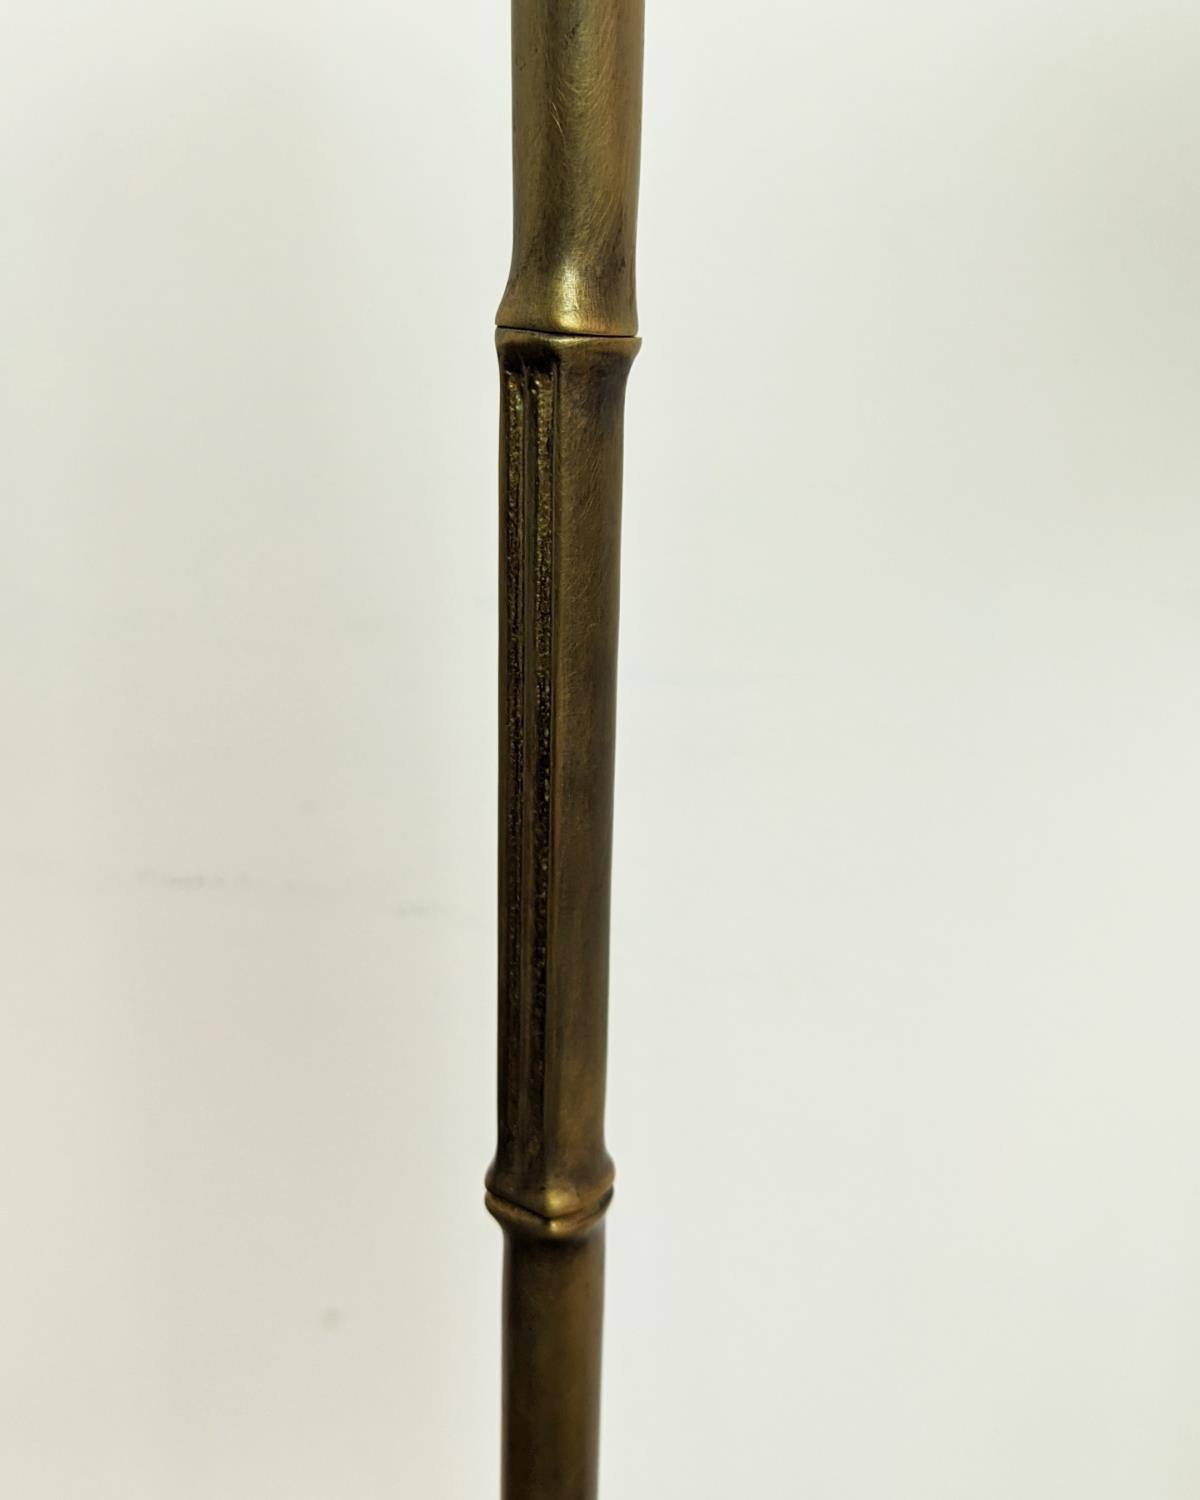 FLOOR READING LAMPS, a pair, faux bamboo metal, attributed to Vaughan, each 119cm H. (2) - Image 6 of 6